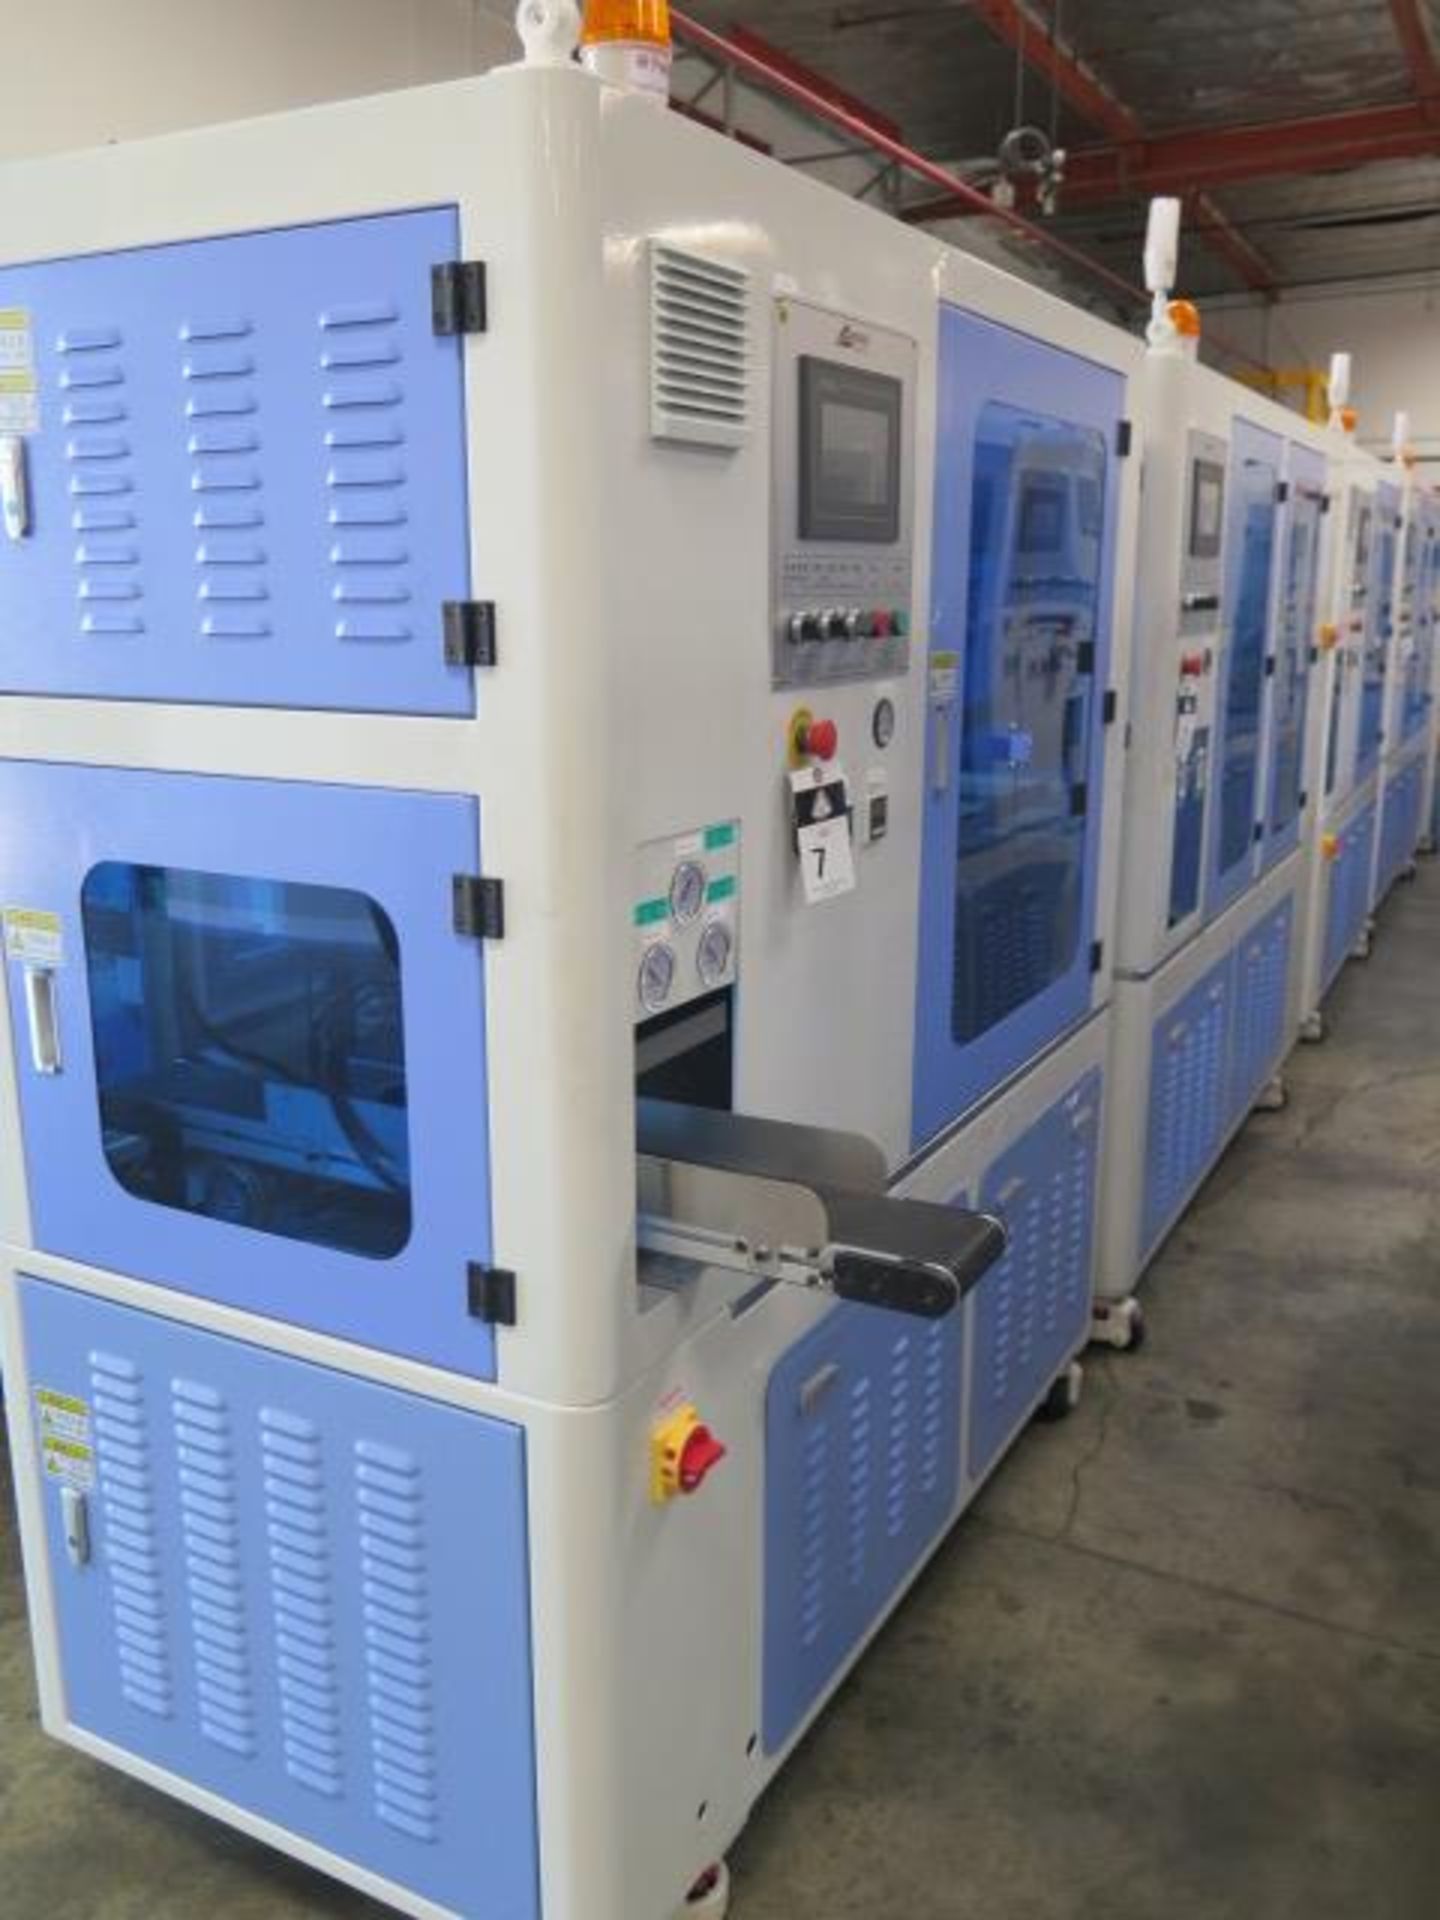 3/2021 Gereke mdl. GRK-TWO1 Cassette Assembly and Packaging Line s/n GRK20210305069, SOLD AS IS